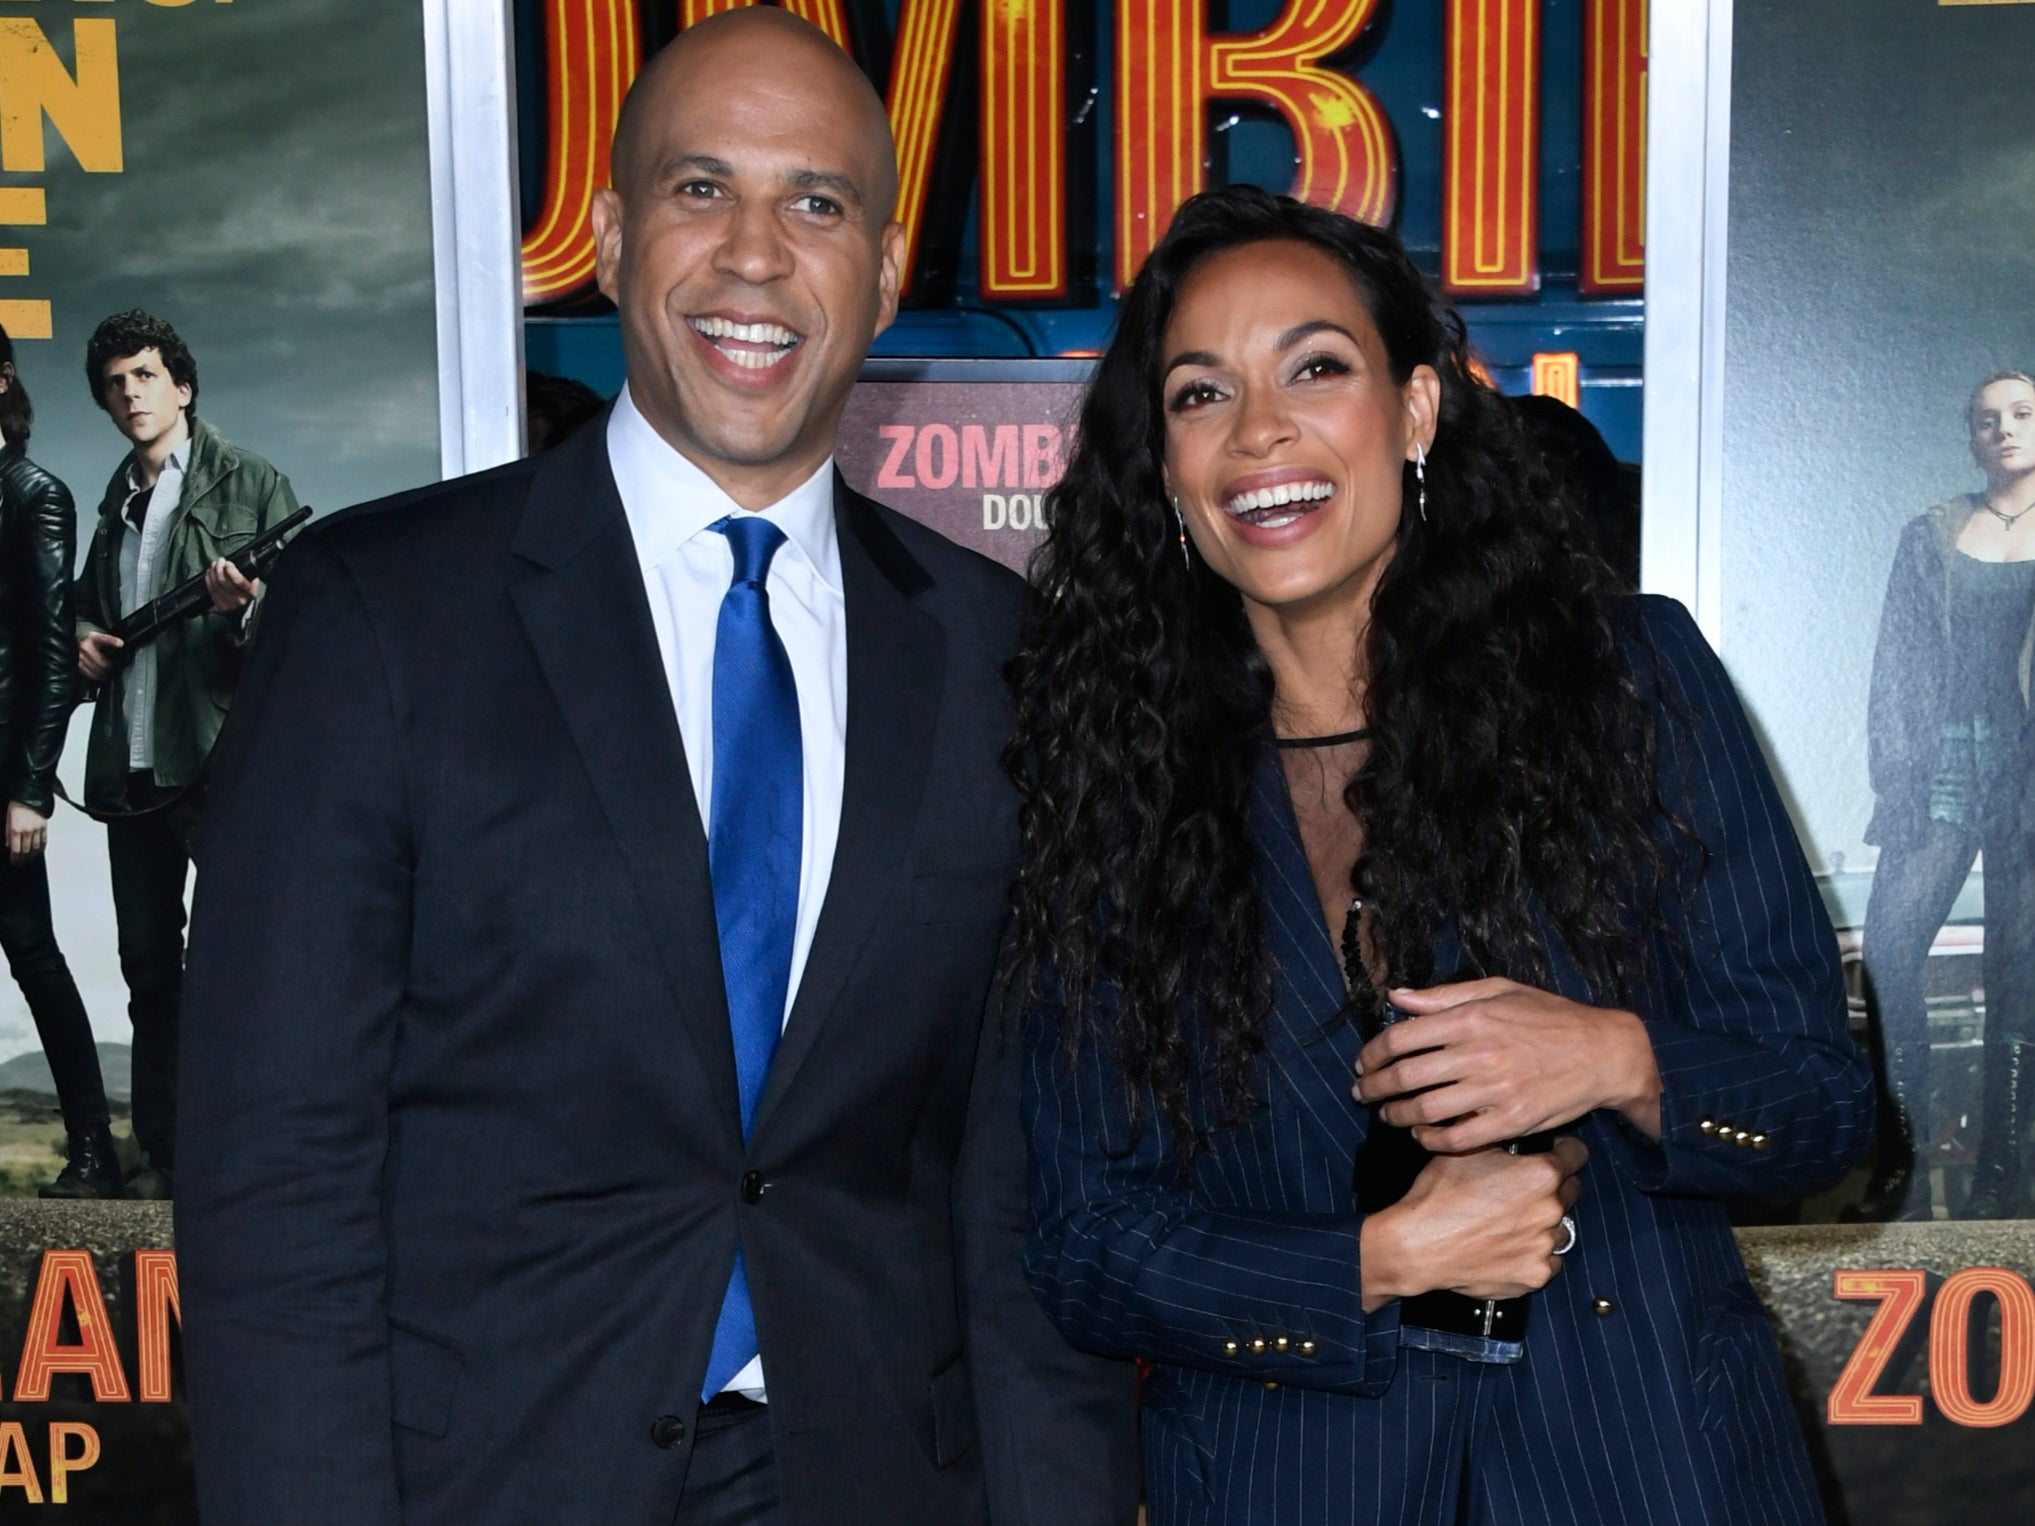 Cory Booker and Rosario Dawson attend the premiere of Zombieland: Double Tap on 10 October 2010 in Westwood, California